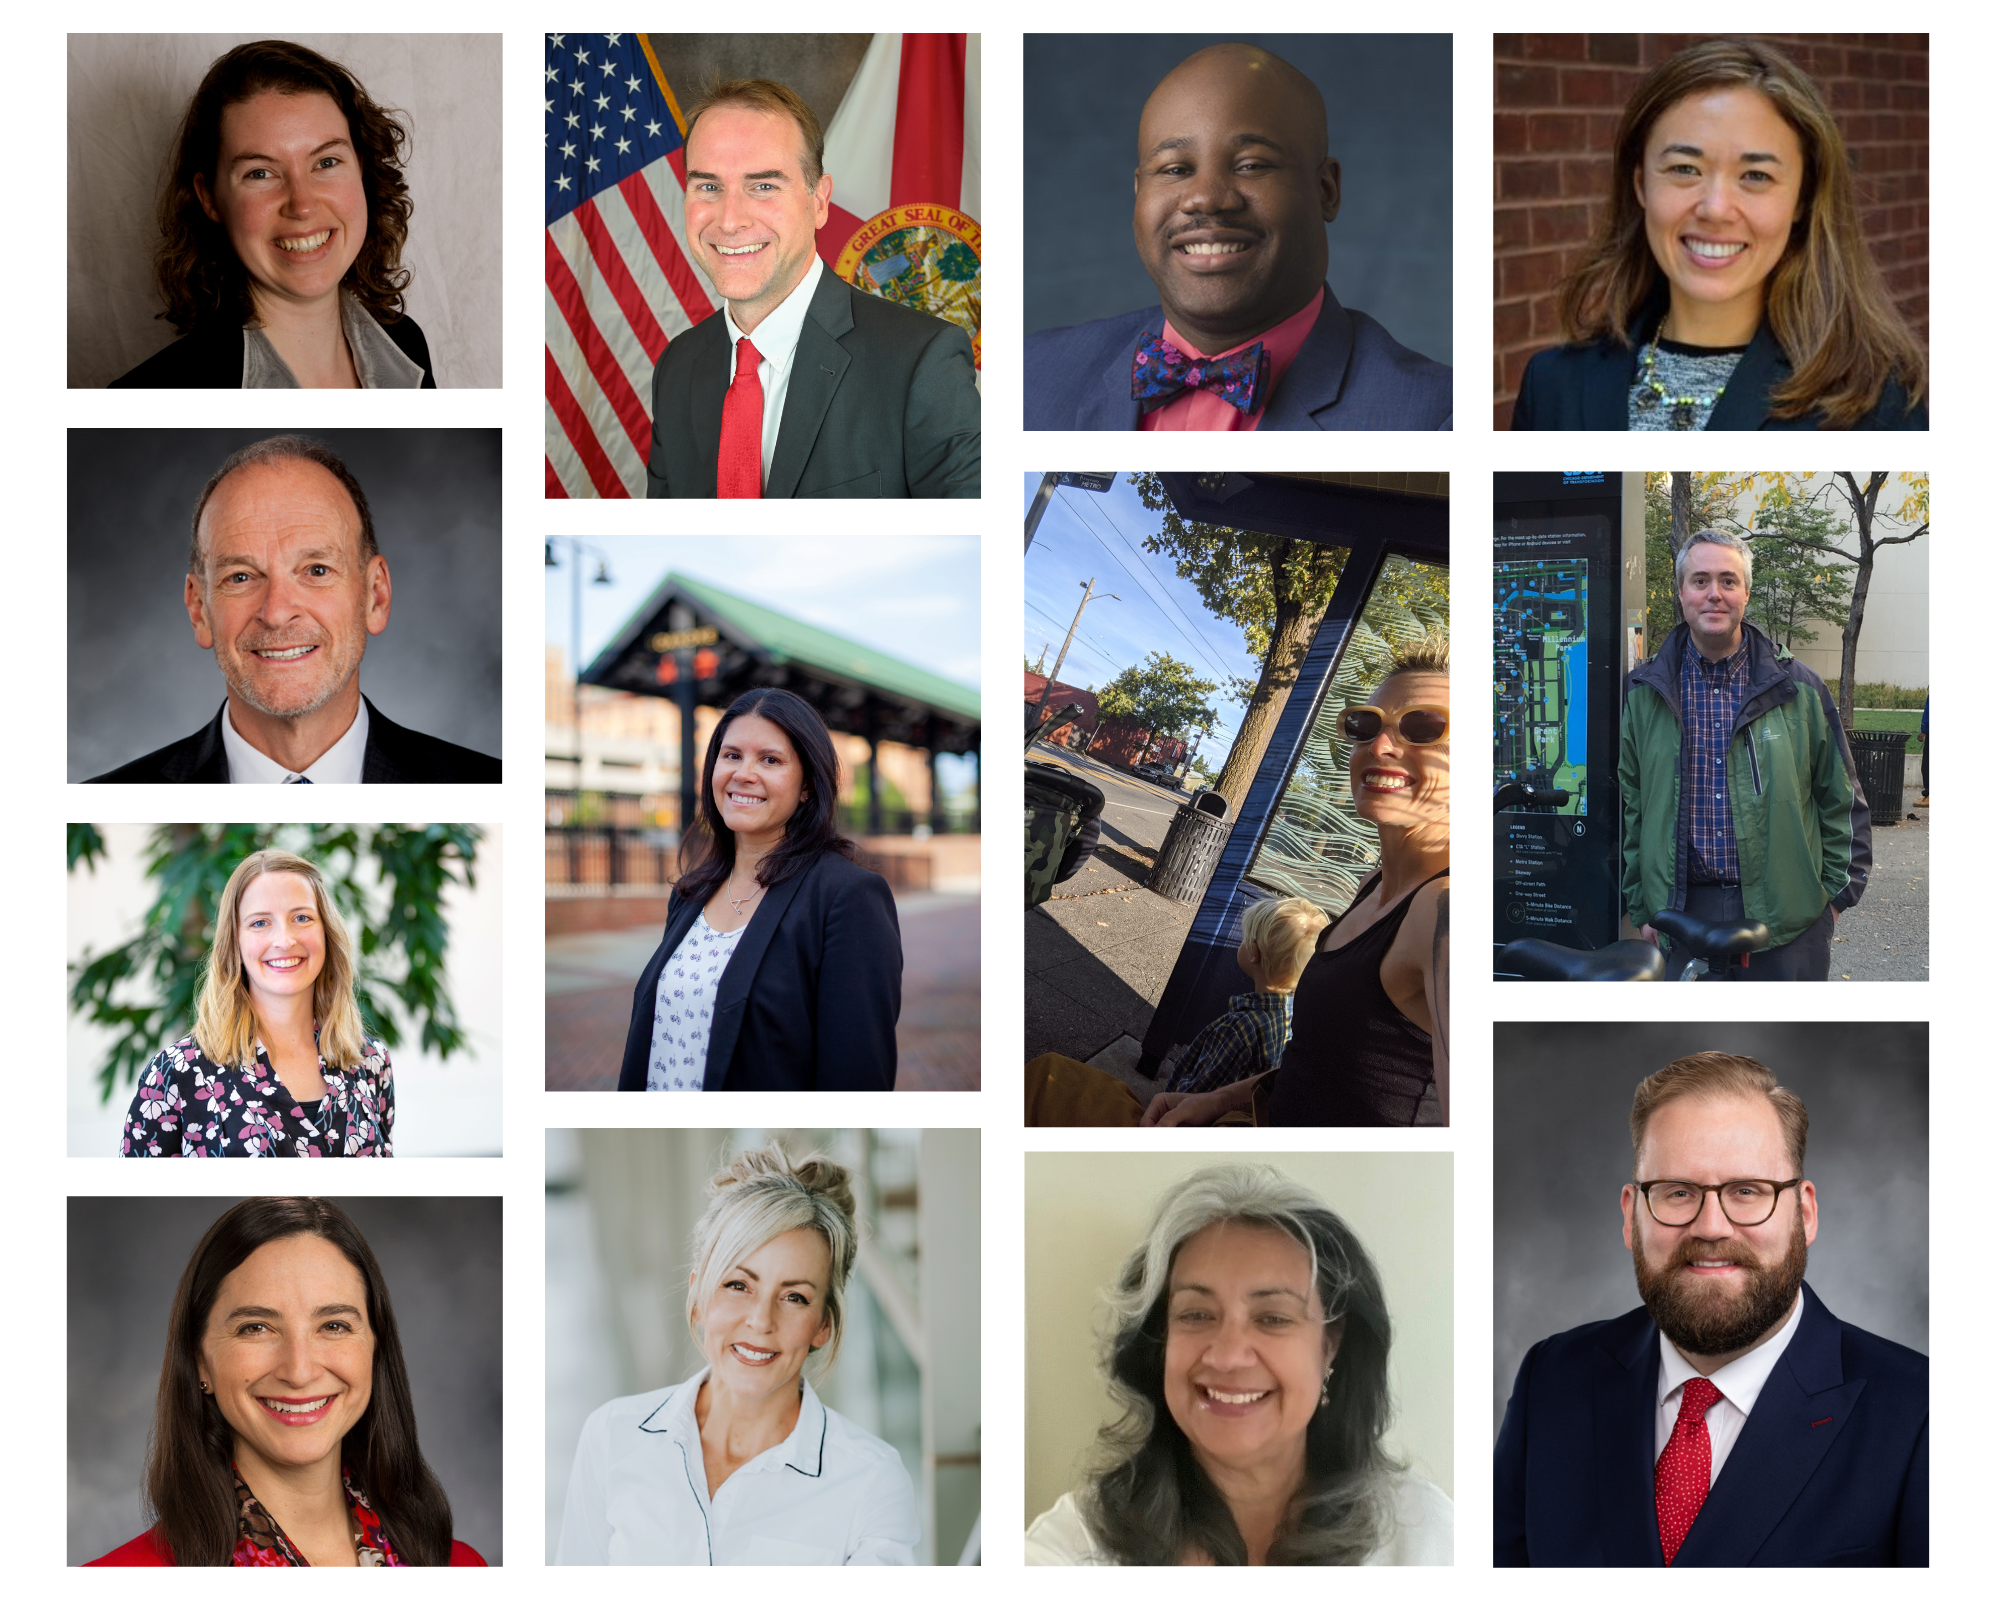 Meet our 2023 Complete Streets Changemakers